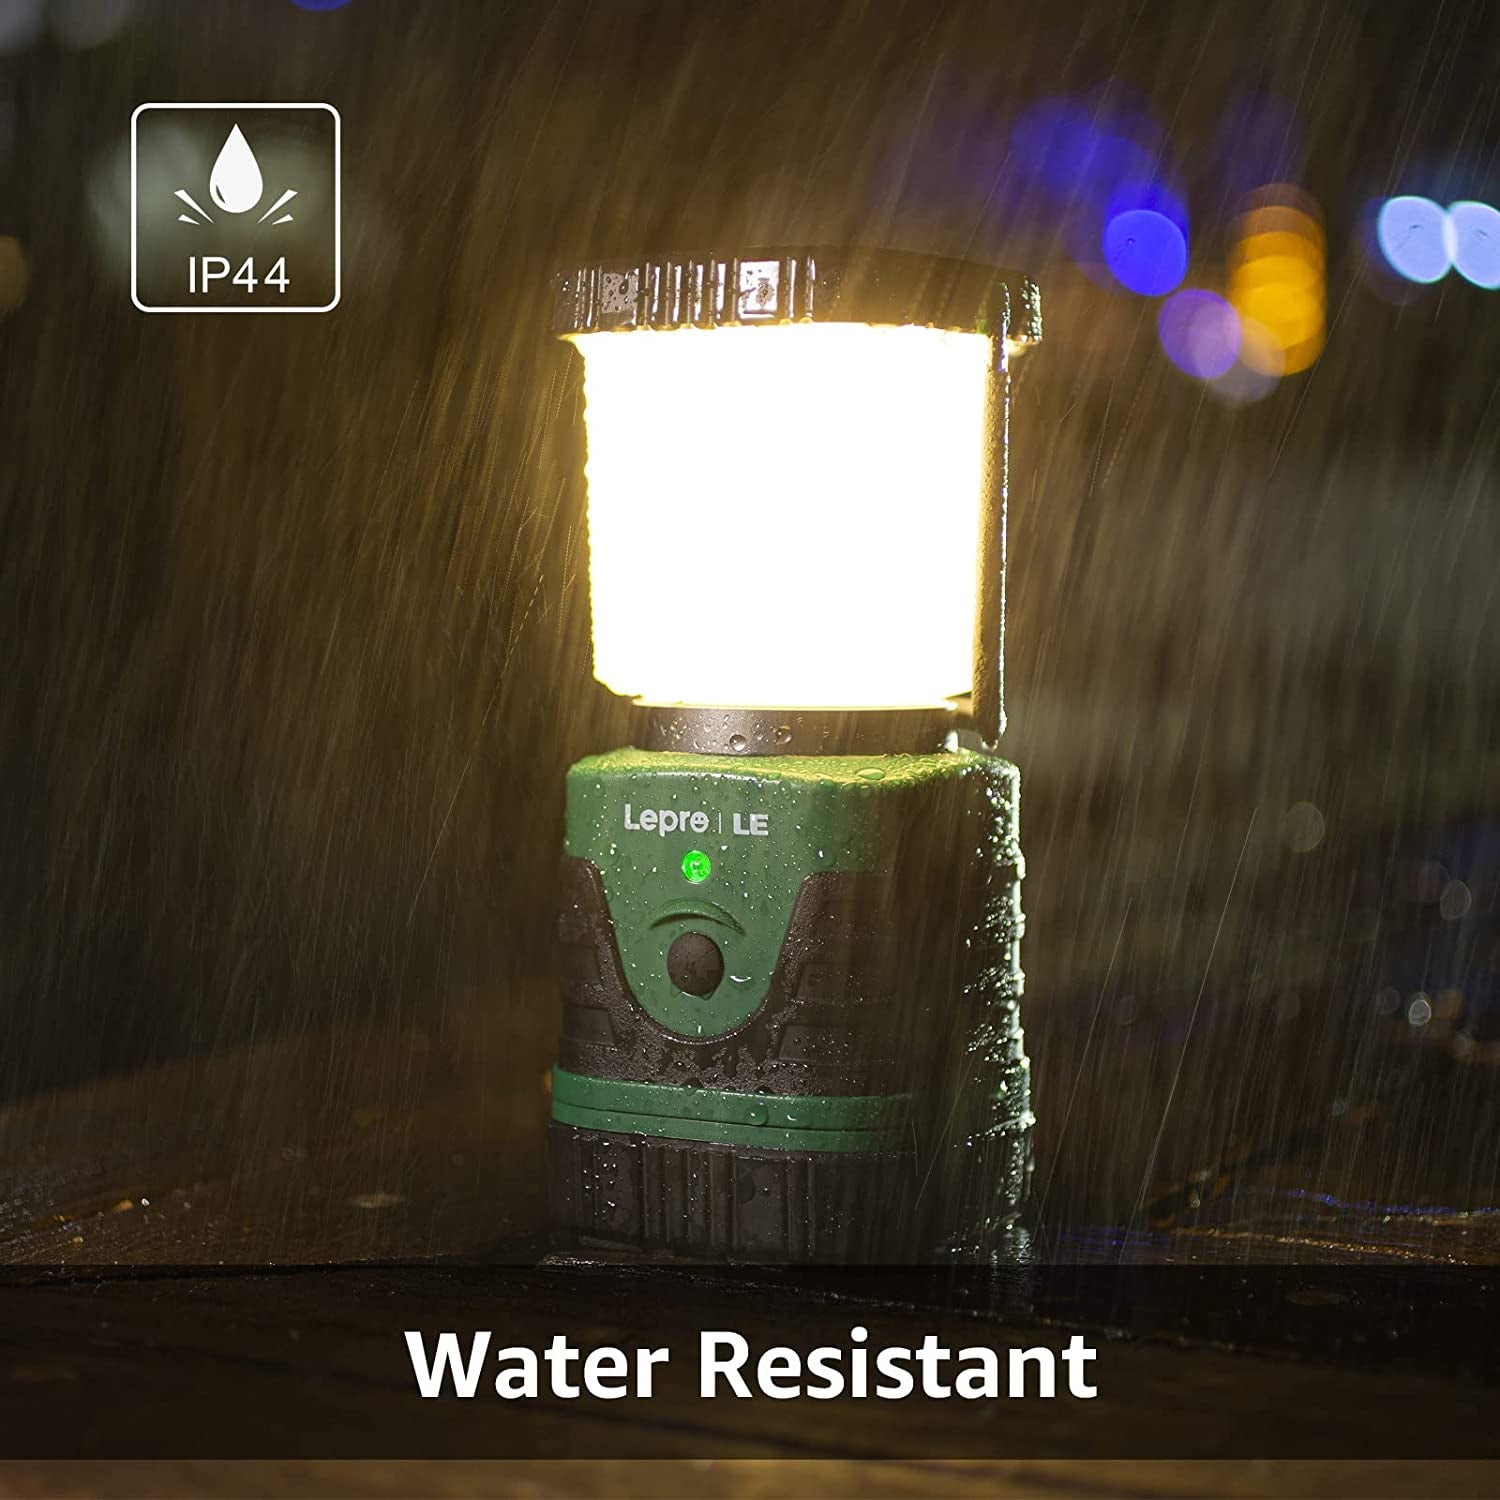 1000LM LED Rechargeable Camping Lantern With 4400Mah Power Bank